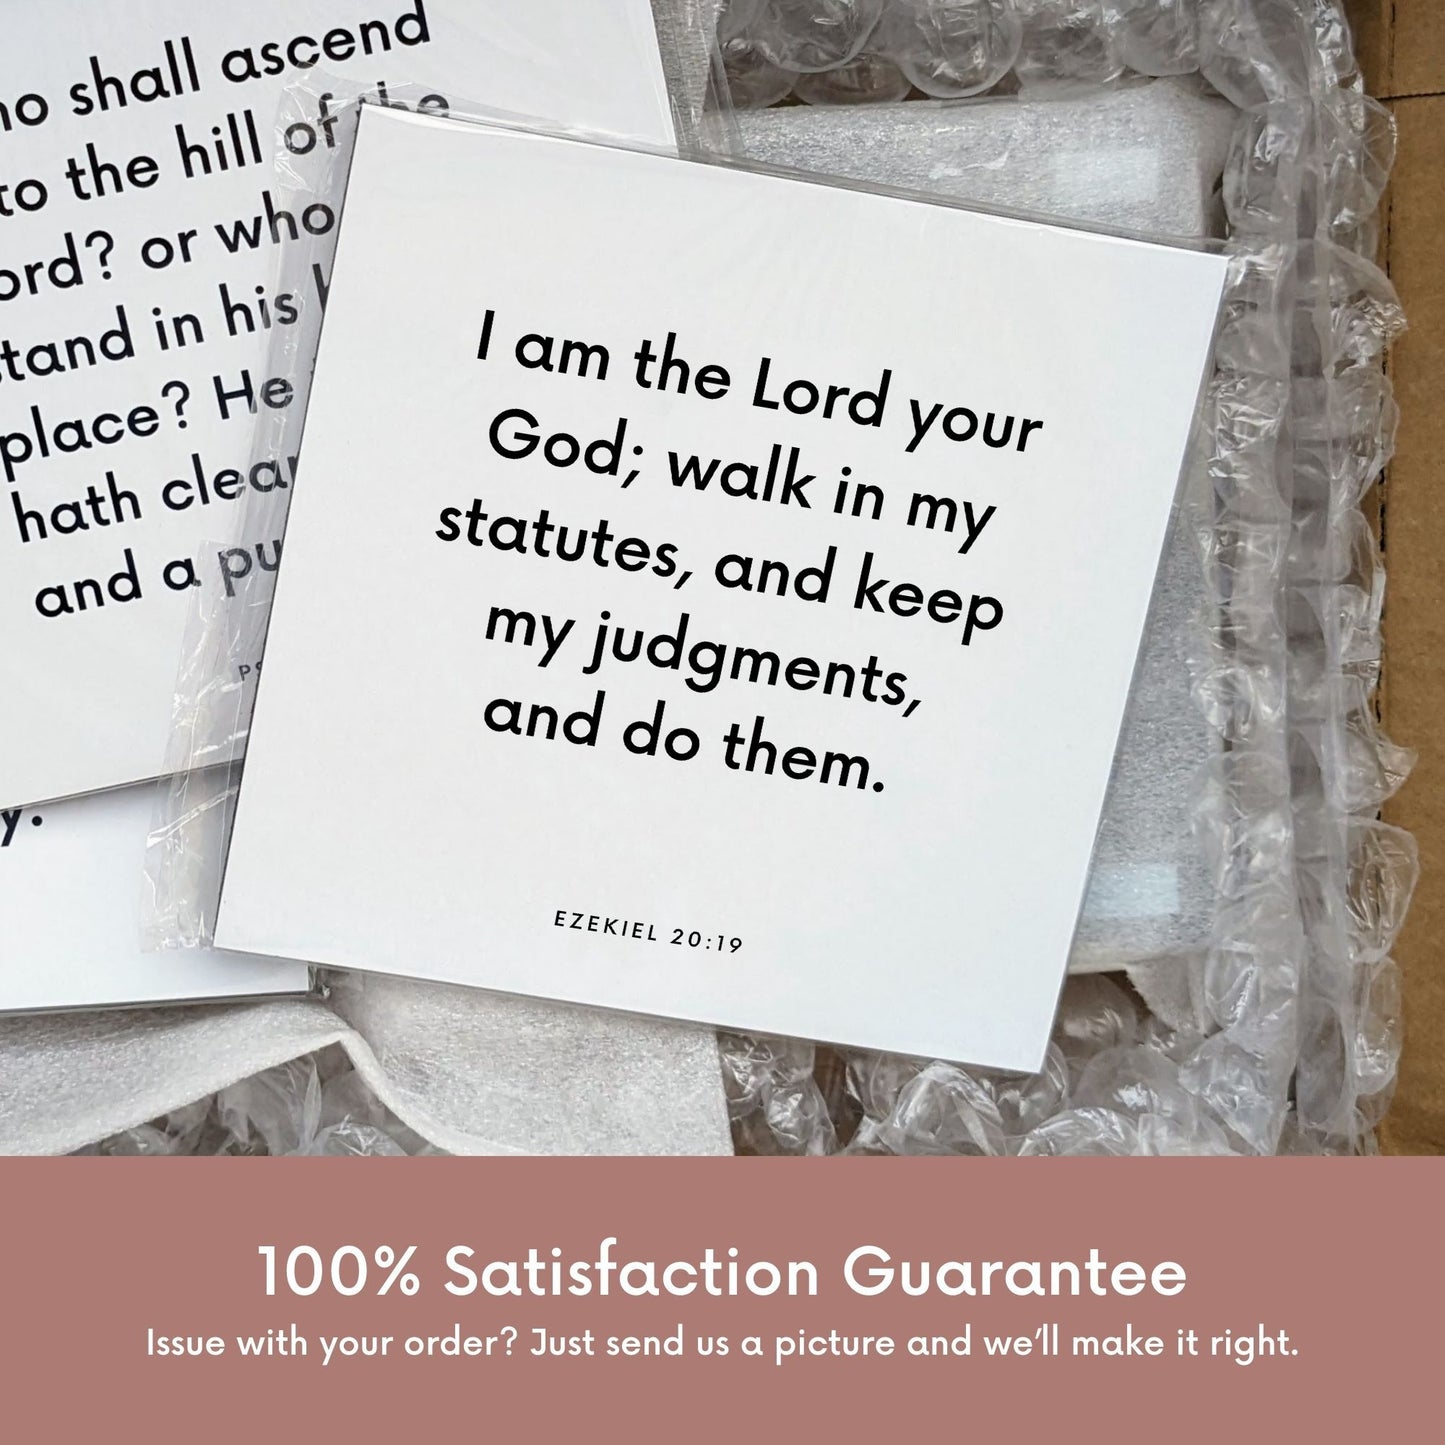 Shipping materials for scripture tile of Ezekiel 20:19 - "I am the Lord your God; walk in my statutes"